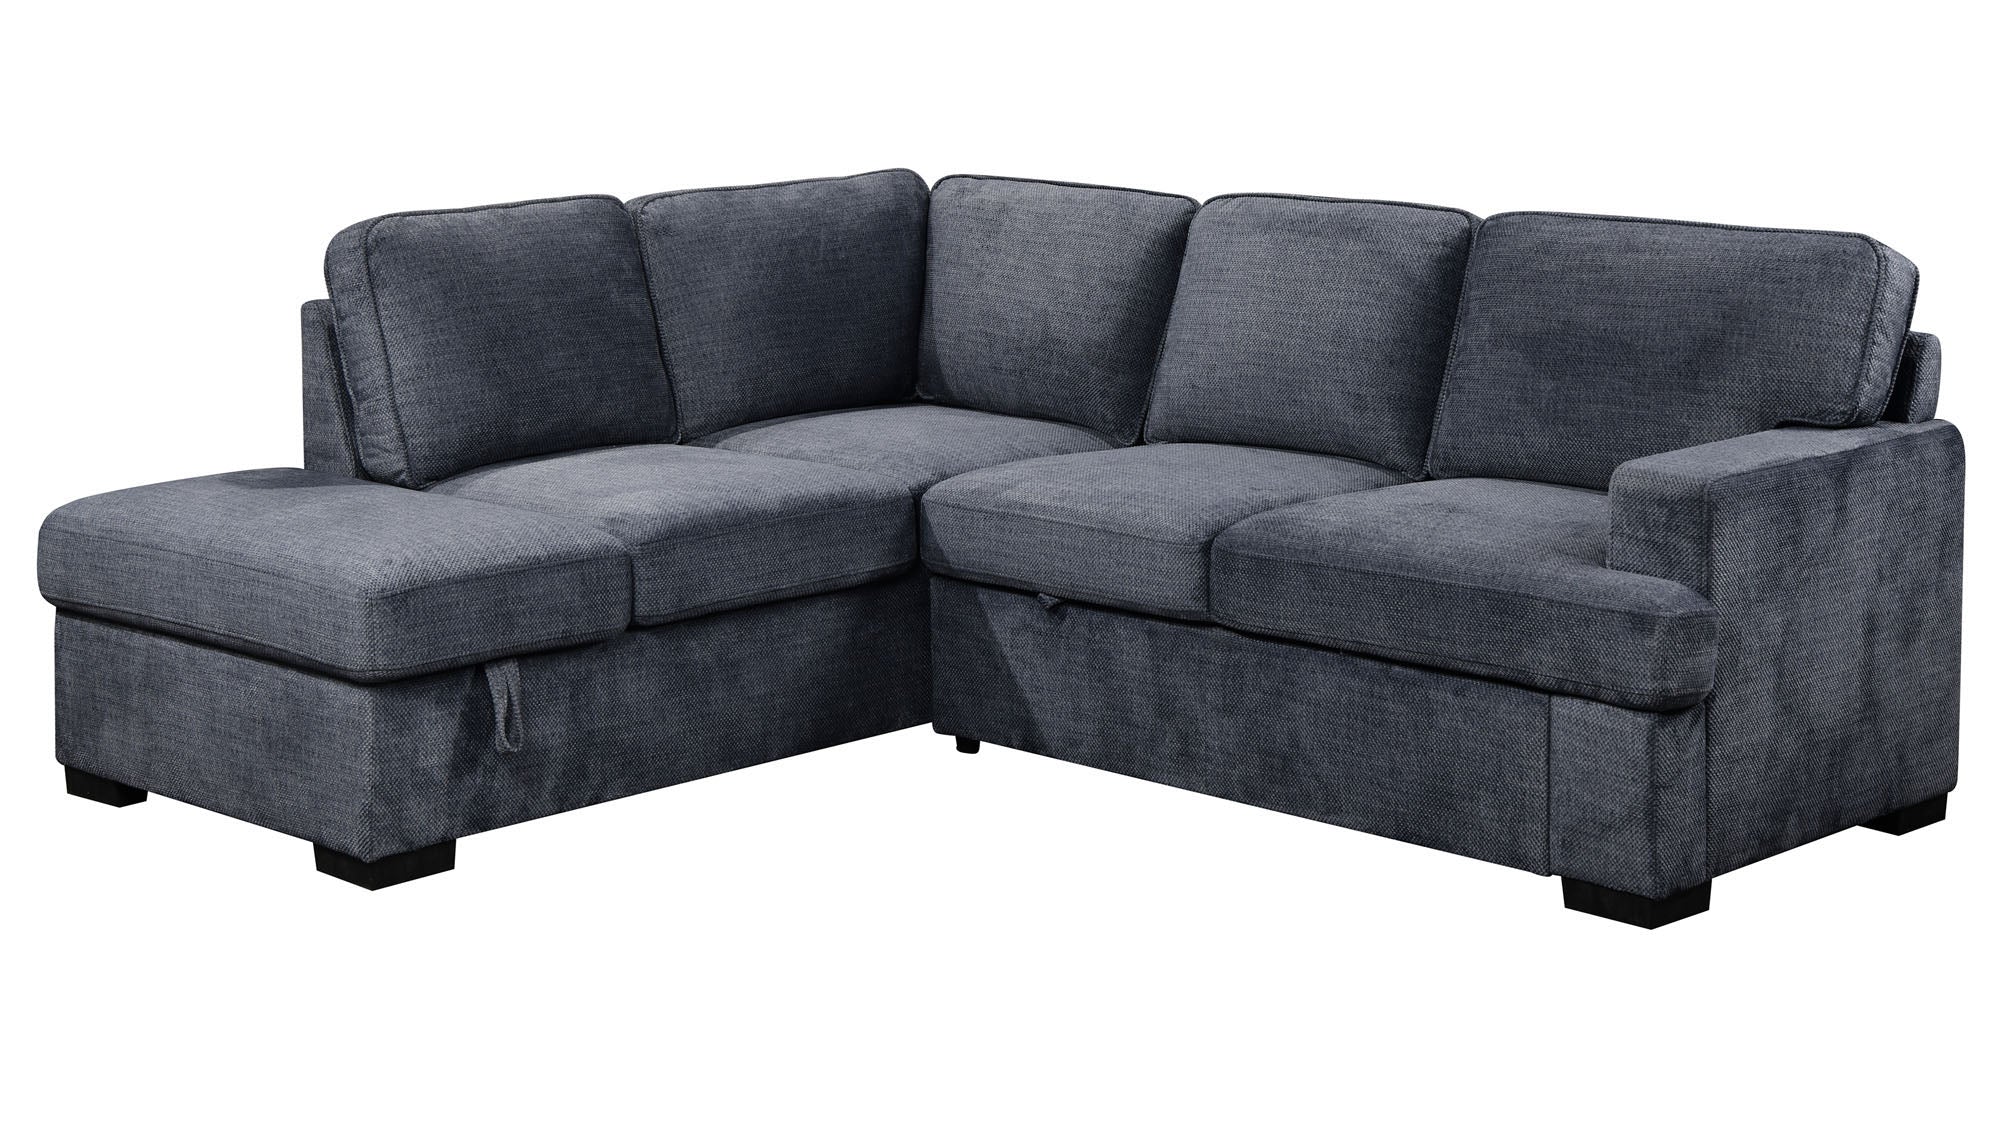 Cole 2 Piece Sleeper Sectional - MJM Furniture